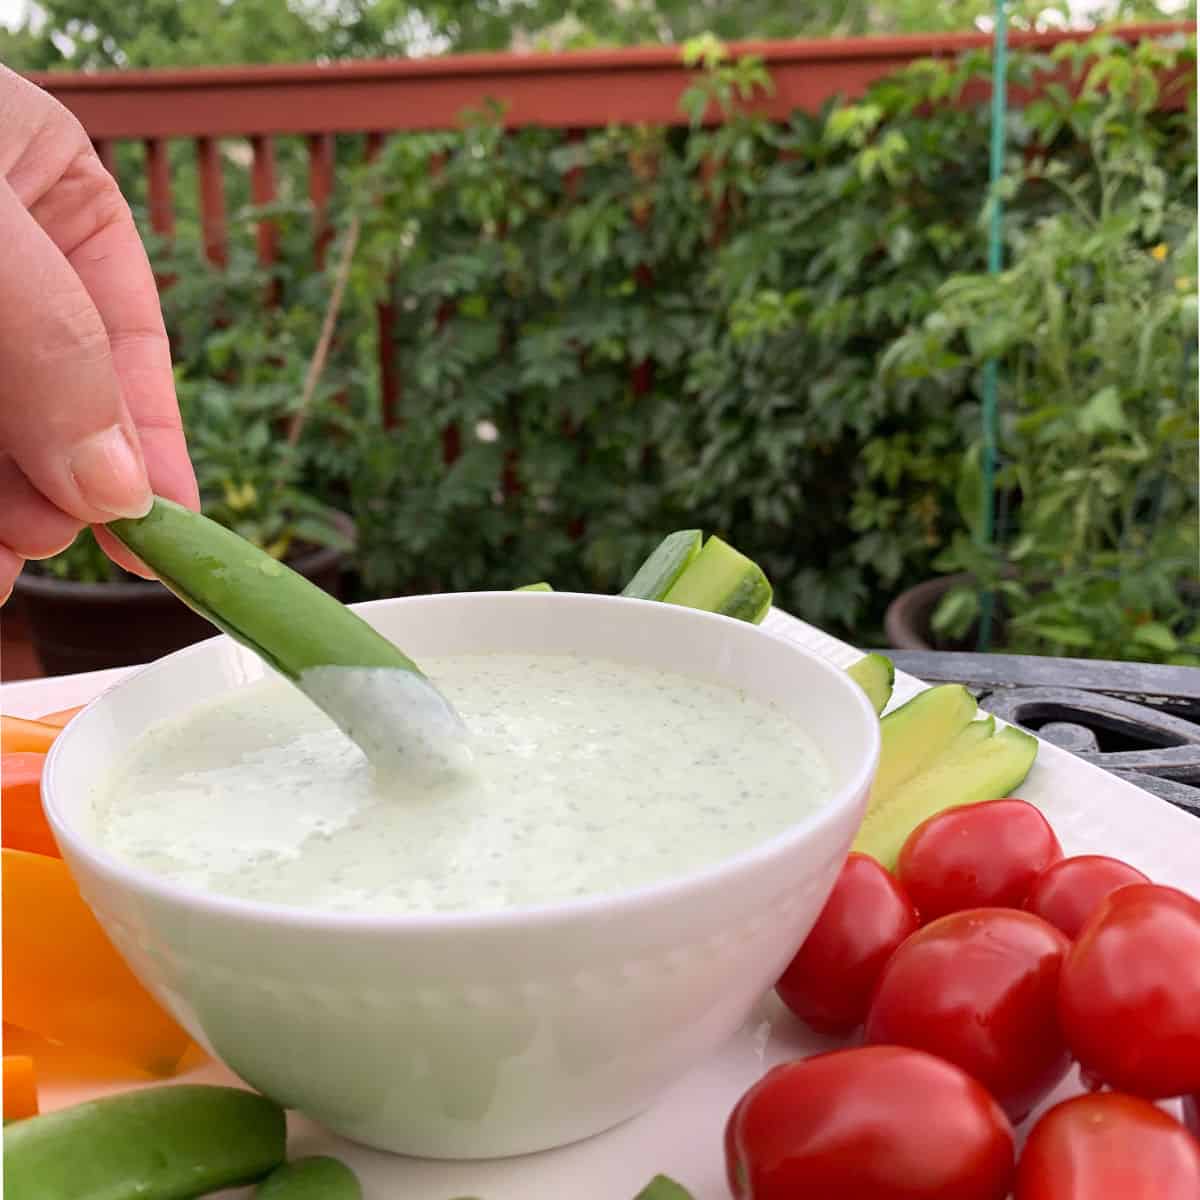 Dipping fresh pea into the whipped feta dip.